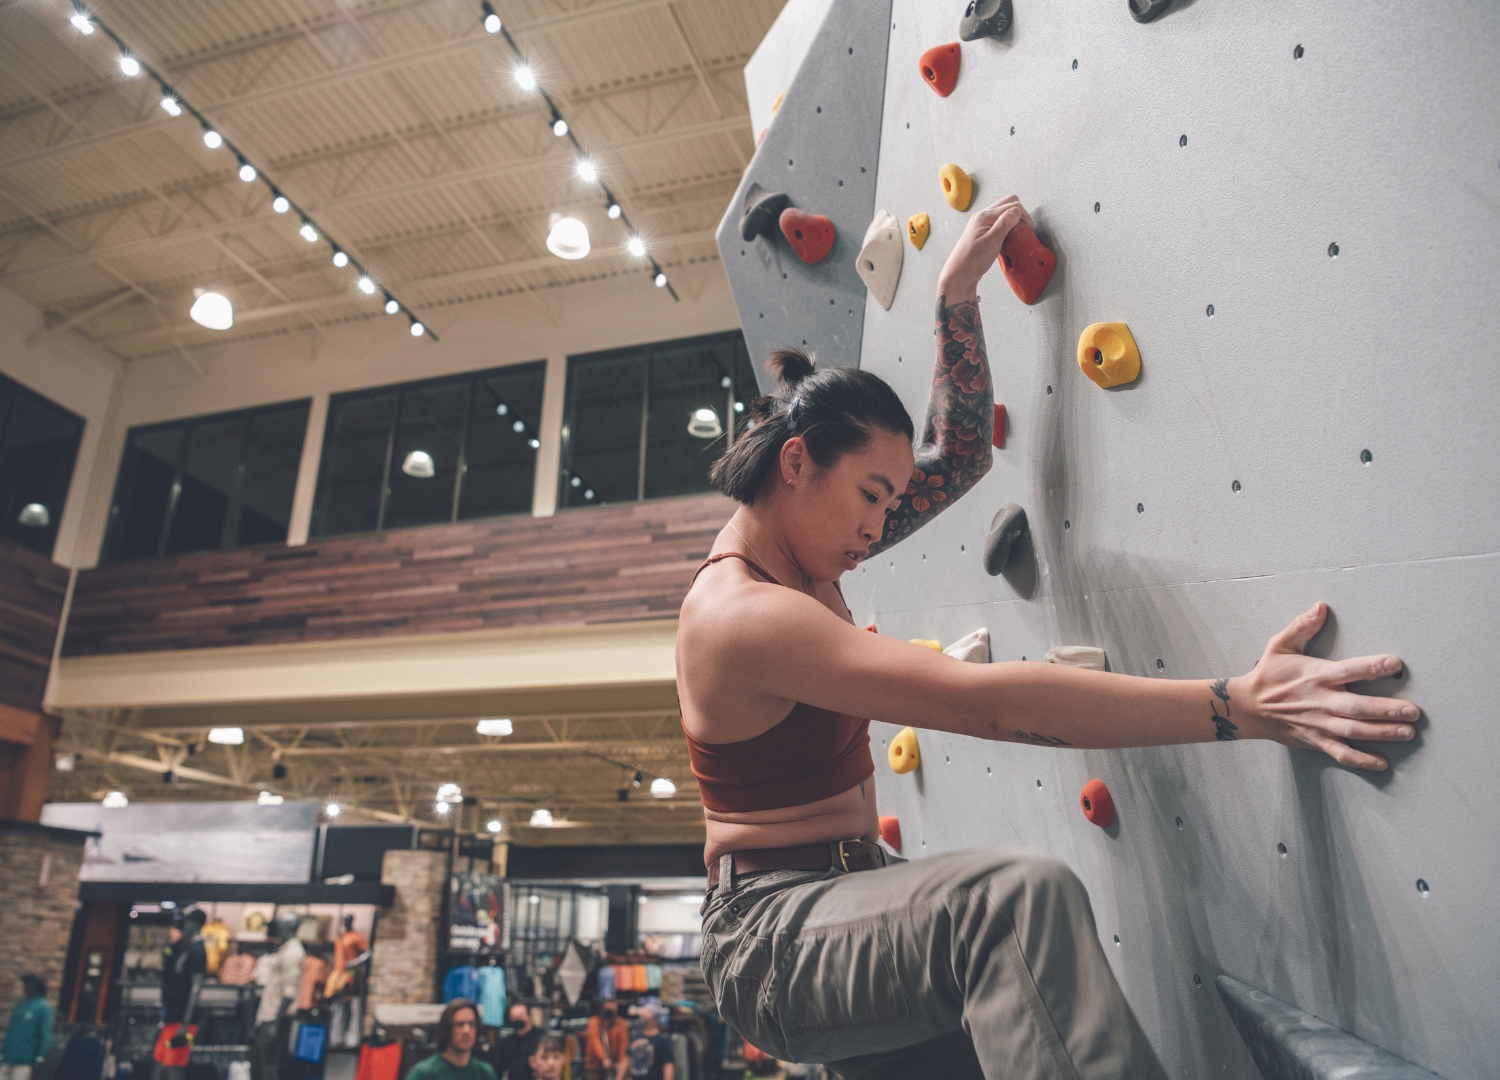 Customer climbing the rock wall at Dick's House of Sport.